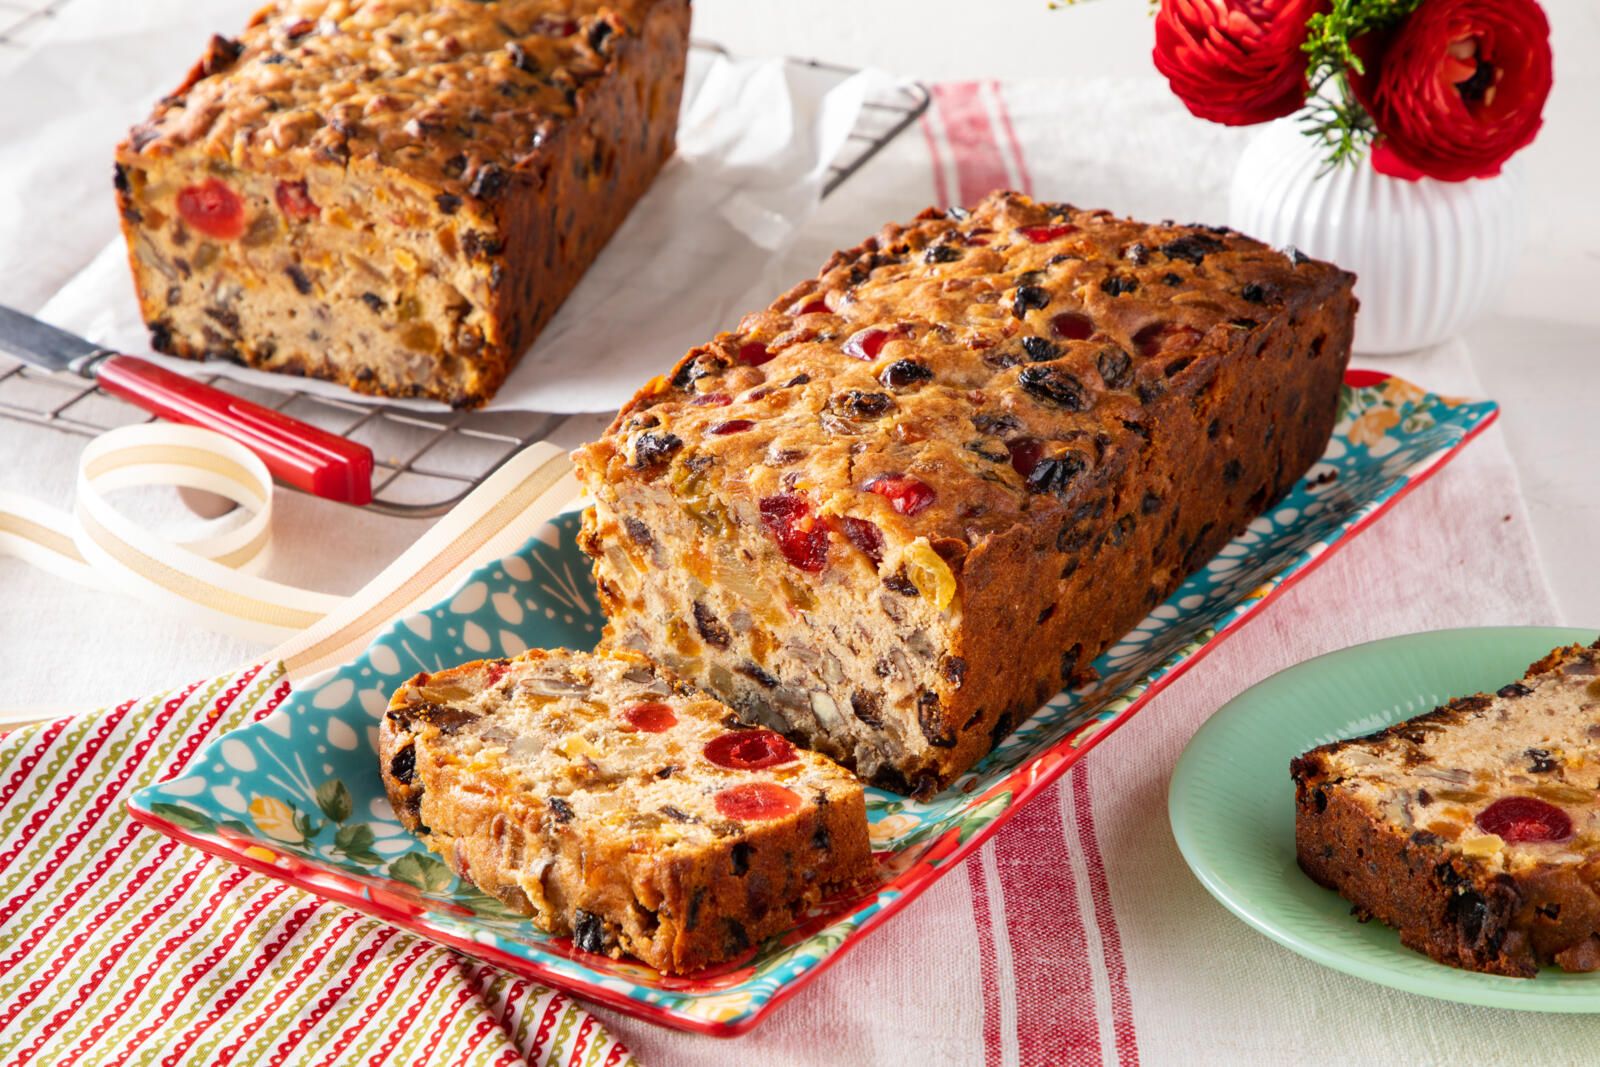 Fruit Cake Recipe [Video] - Sweet and Savory Meals